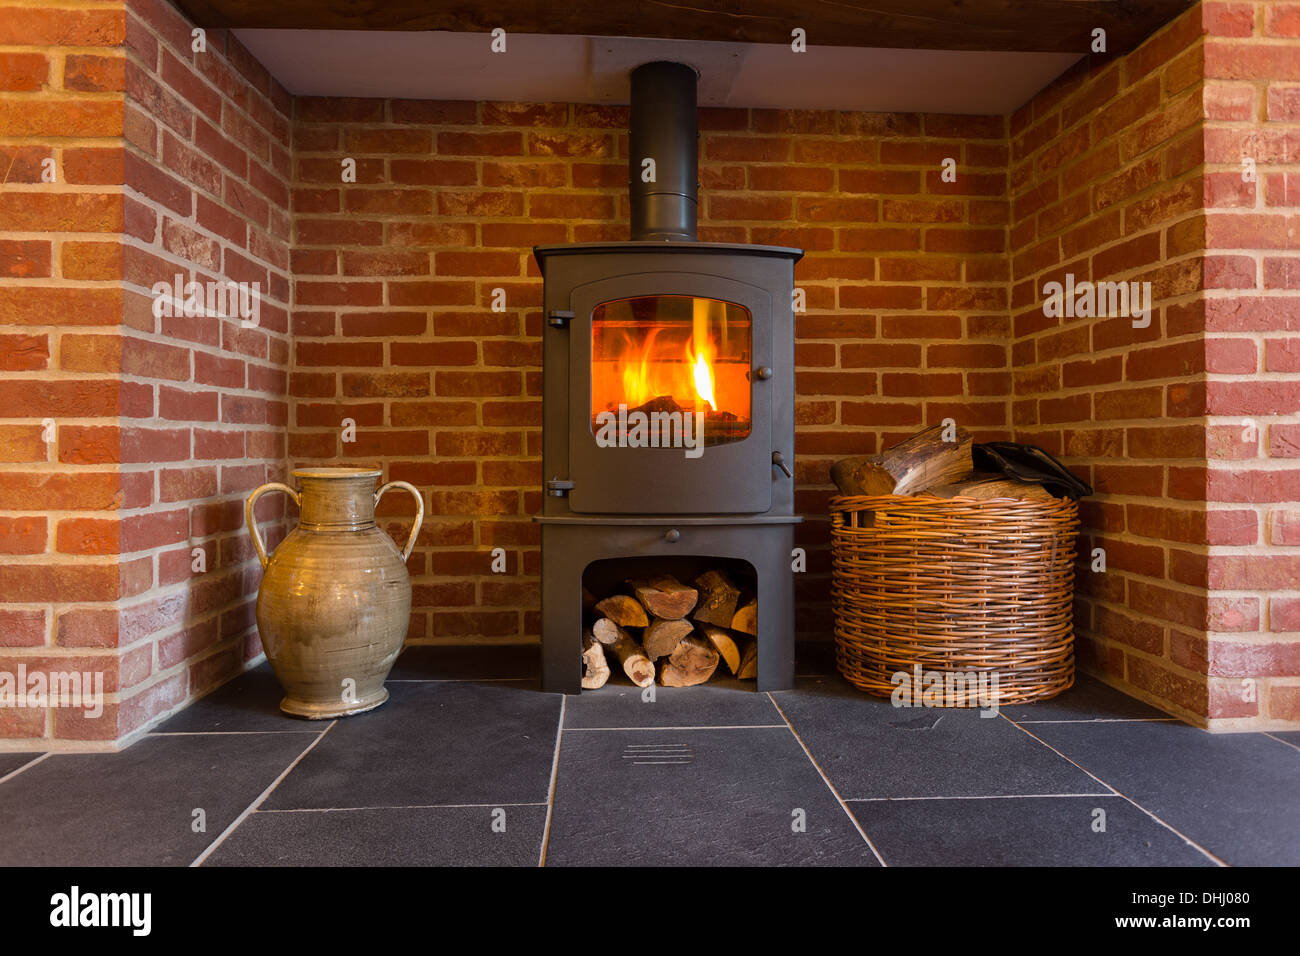 Fire in wood burning stove in brick fireplace with basket of cut wood ready for burning Stock Photo